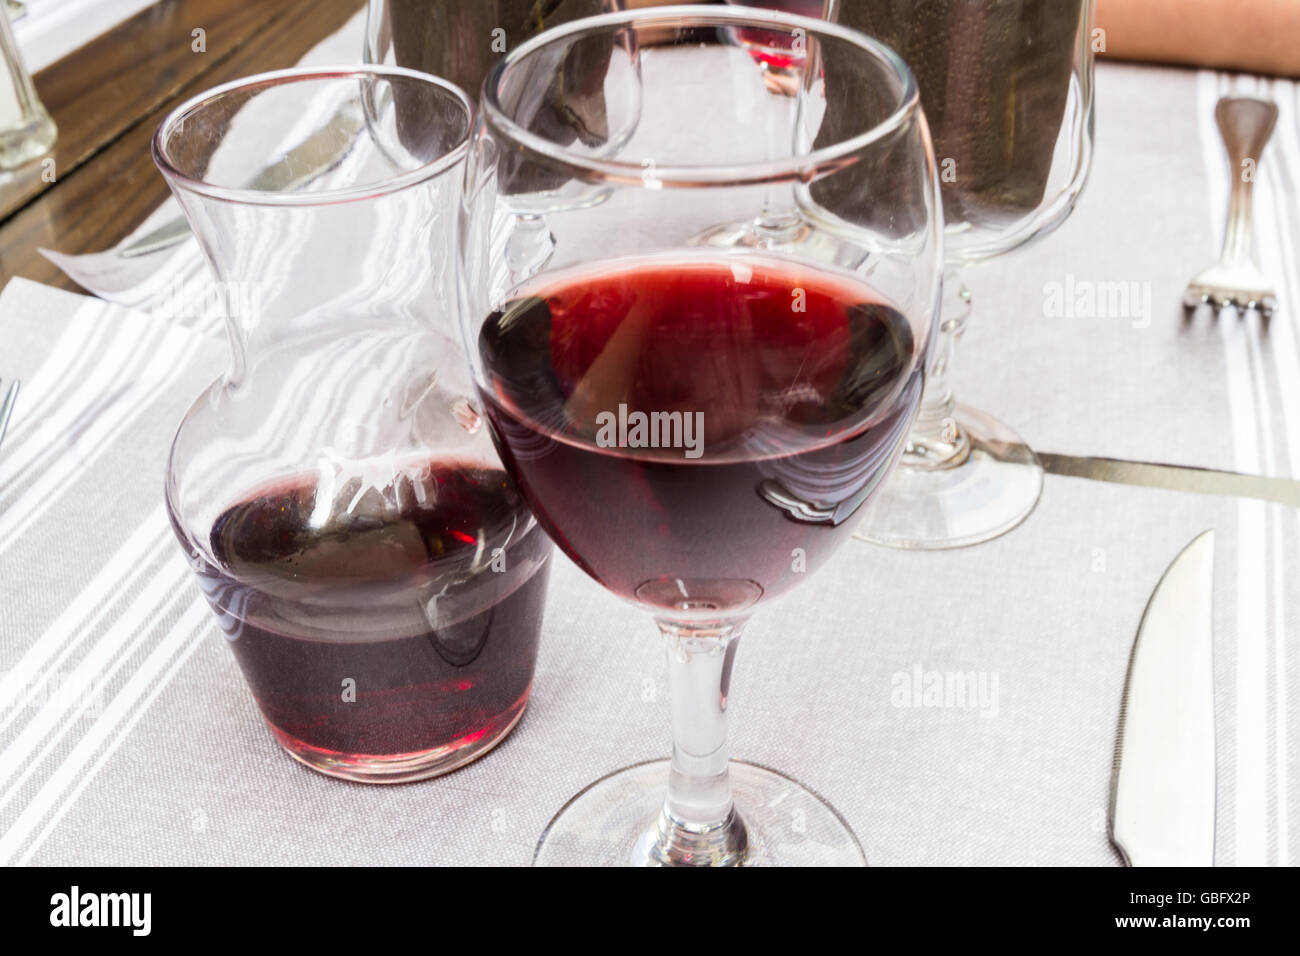 Outside table laid for eating with carafe and glass of red wine. Stock Photo